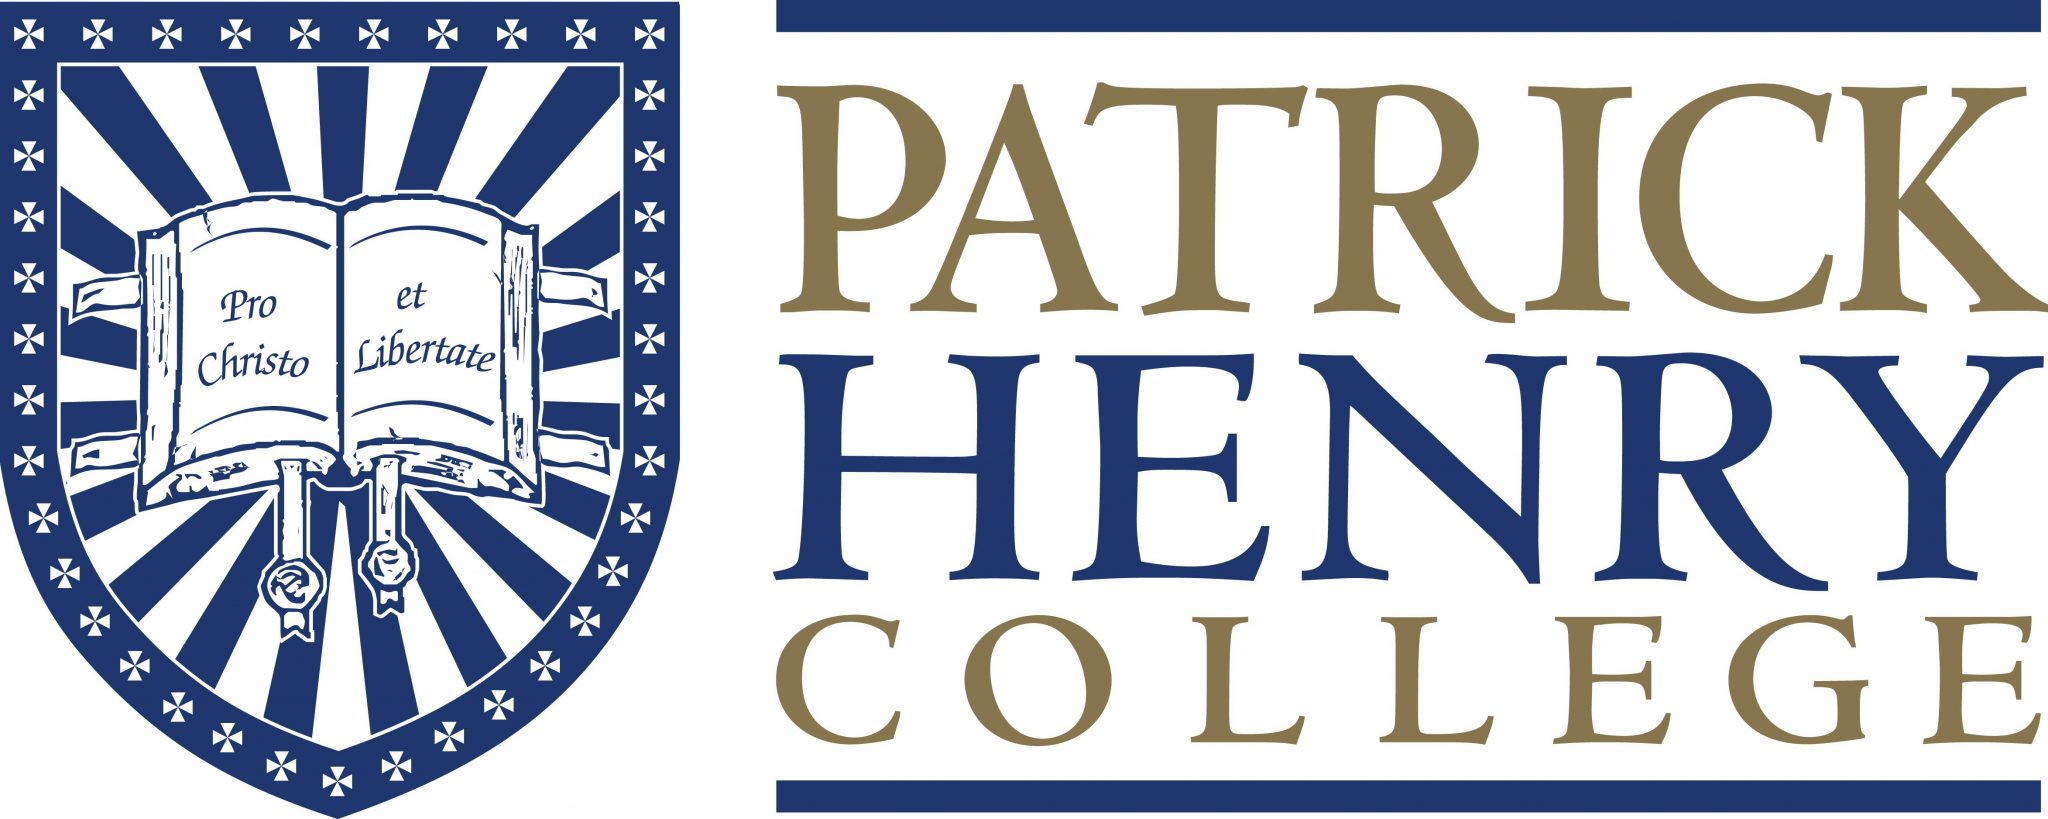 Patrick Henry College Association of Classical Christian Schools (ACCS)